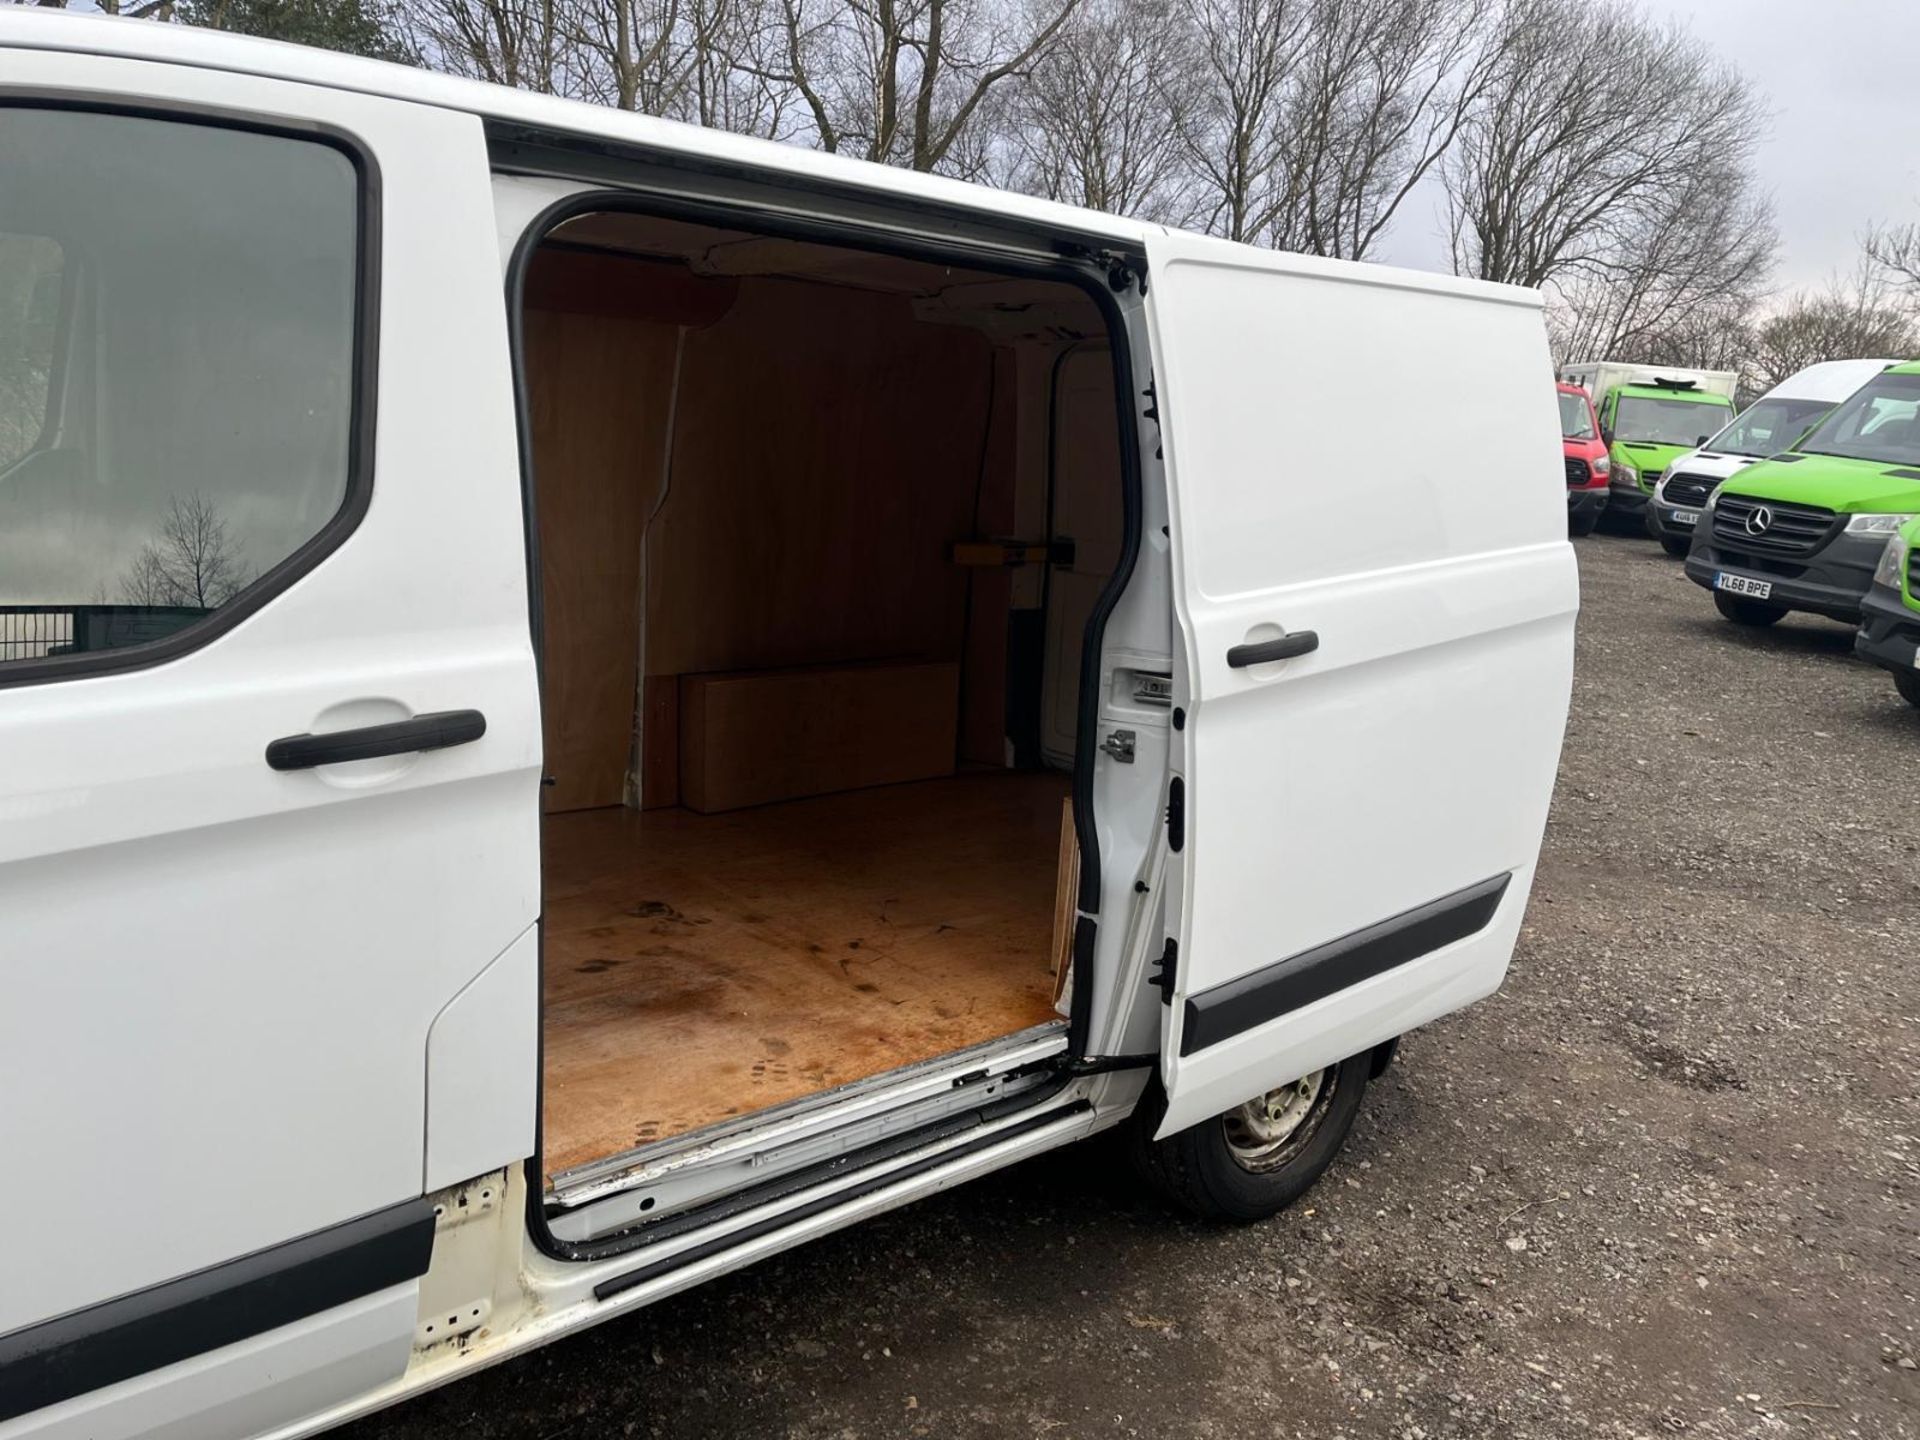 2018 FORD TRANSIT CUSTOM TDCI 130 L1 H1 SWB PANEL VAN ->>>SPECIAL CLEARANCE<<< - Image 6 of 15